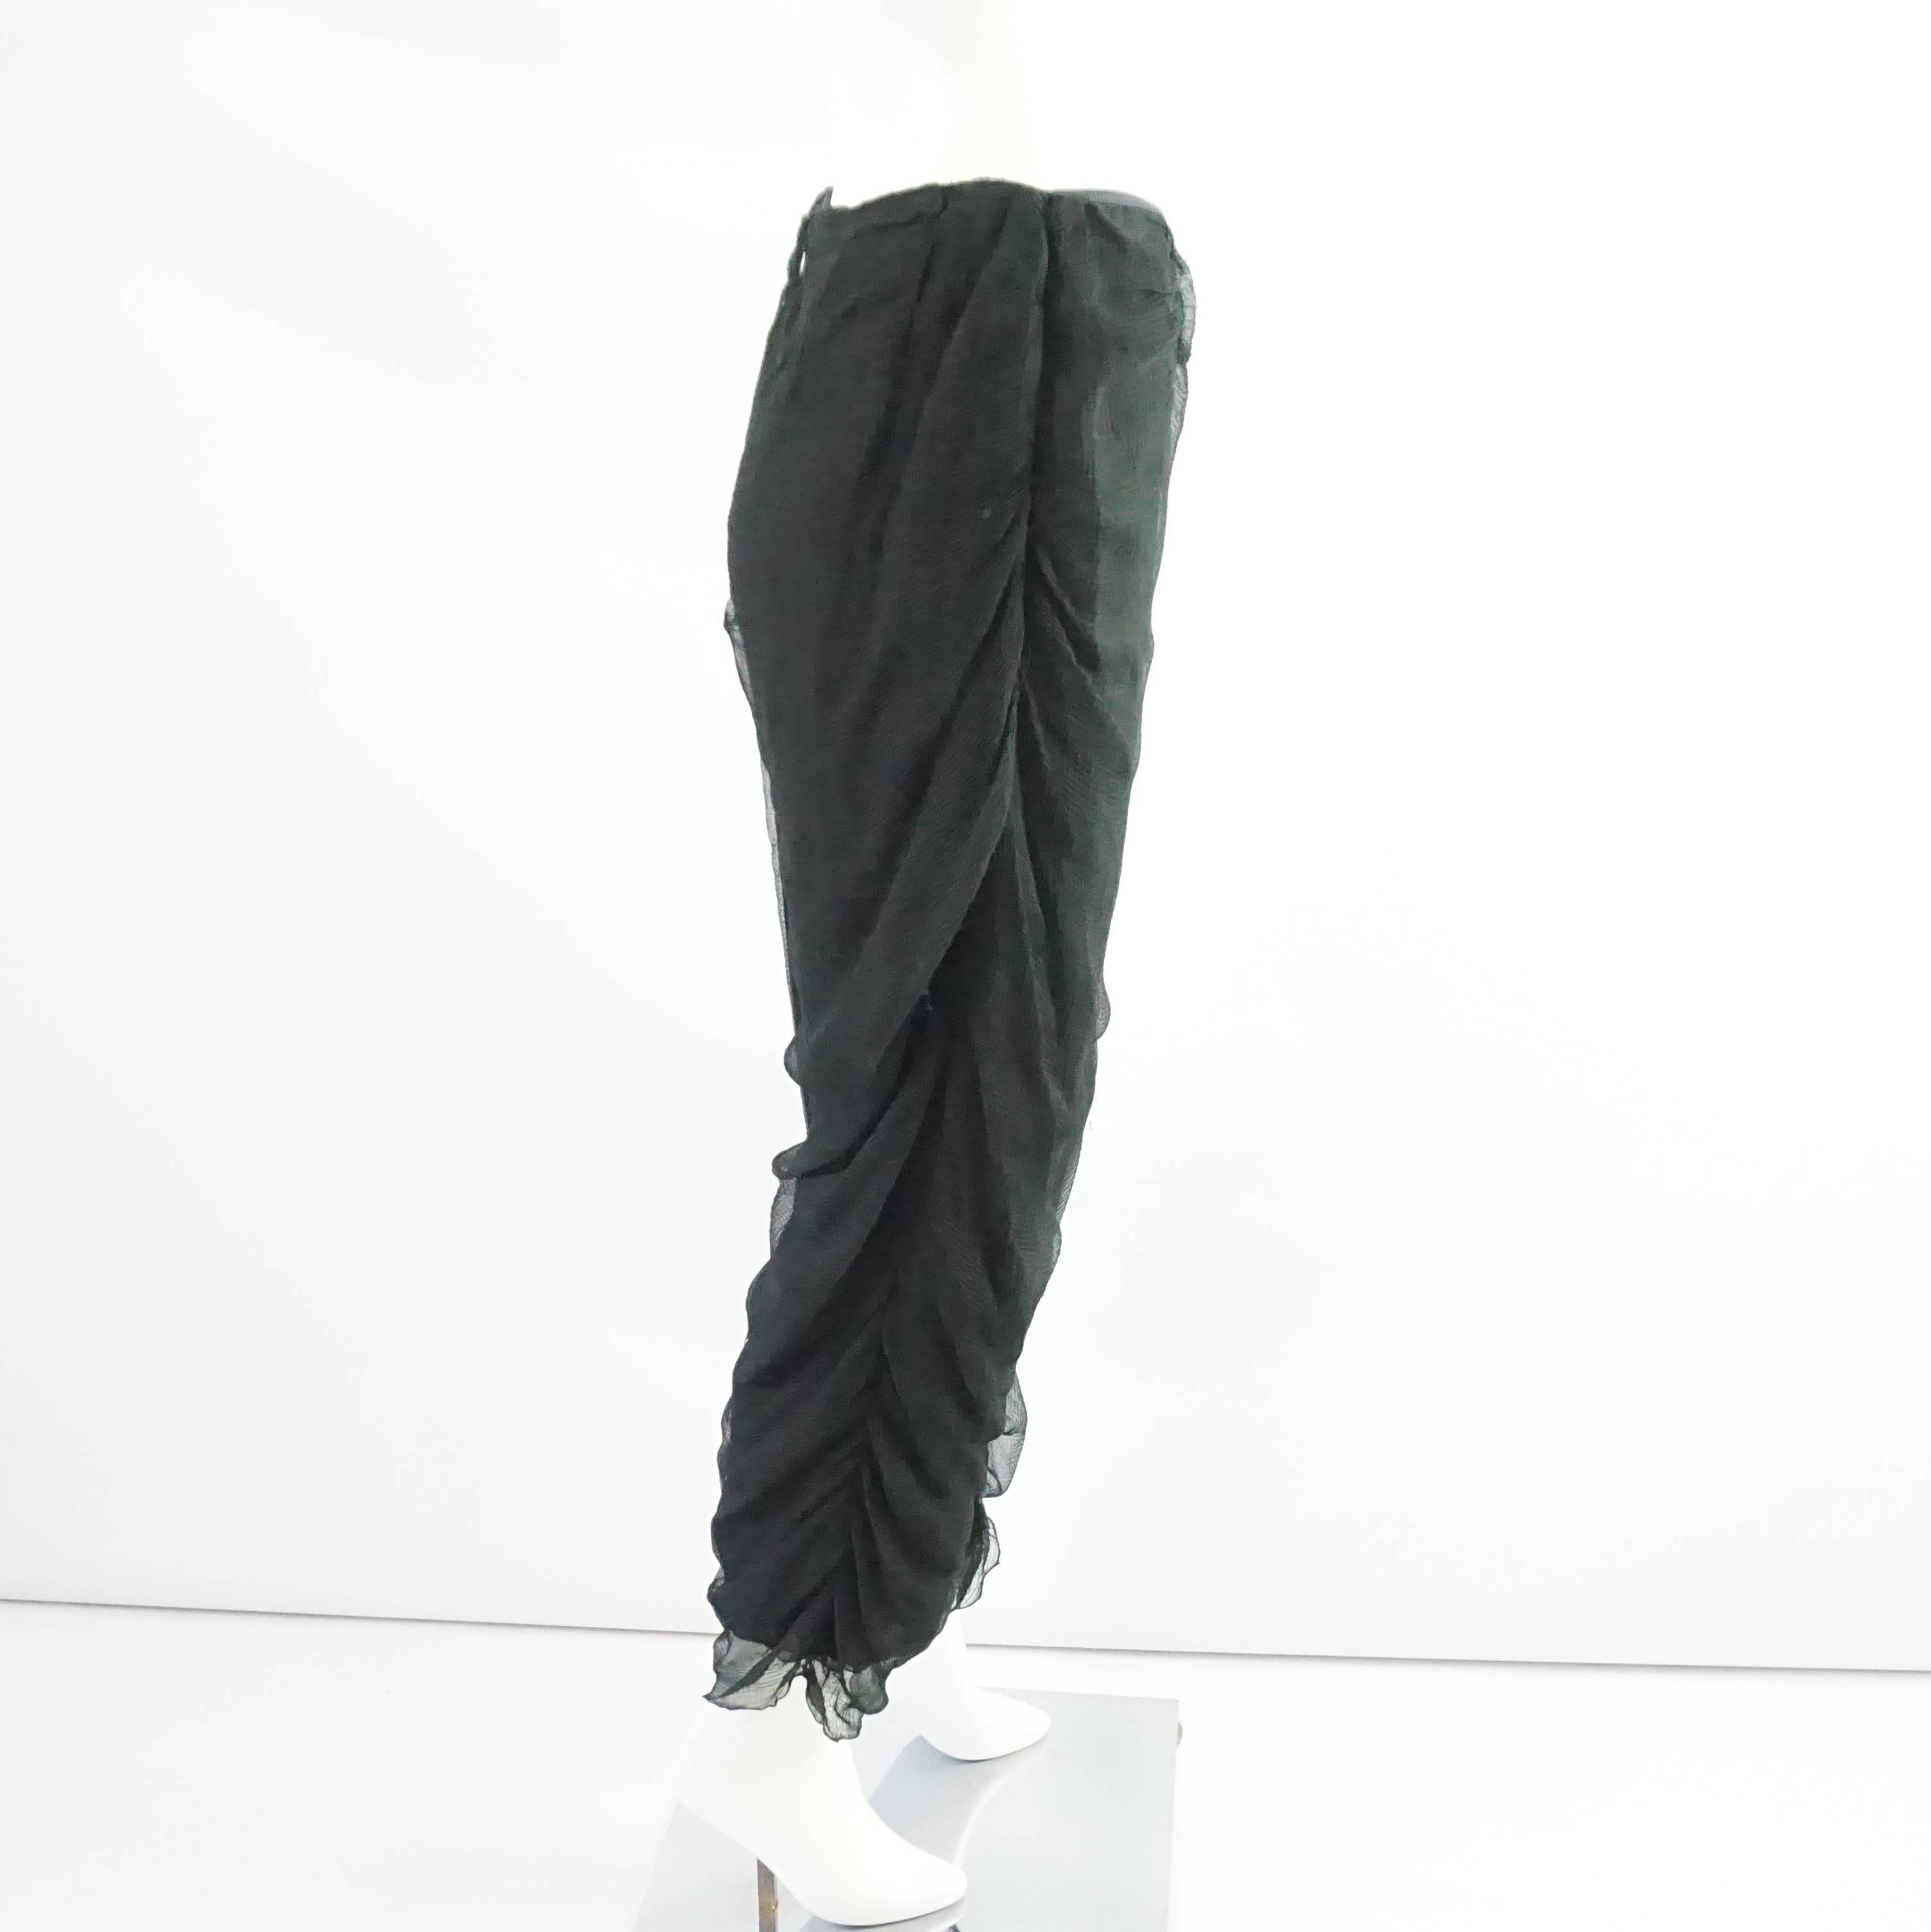 These Chado pants are black and made of silk chiffon. They are lightweight, textured, and slightly sheer. The bottoms of the legs have cinched fabric. These pants are in very good condition with some overall pulled fabric. Size